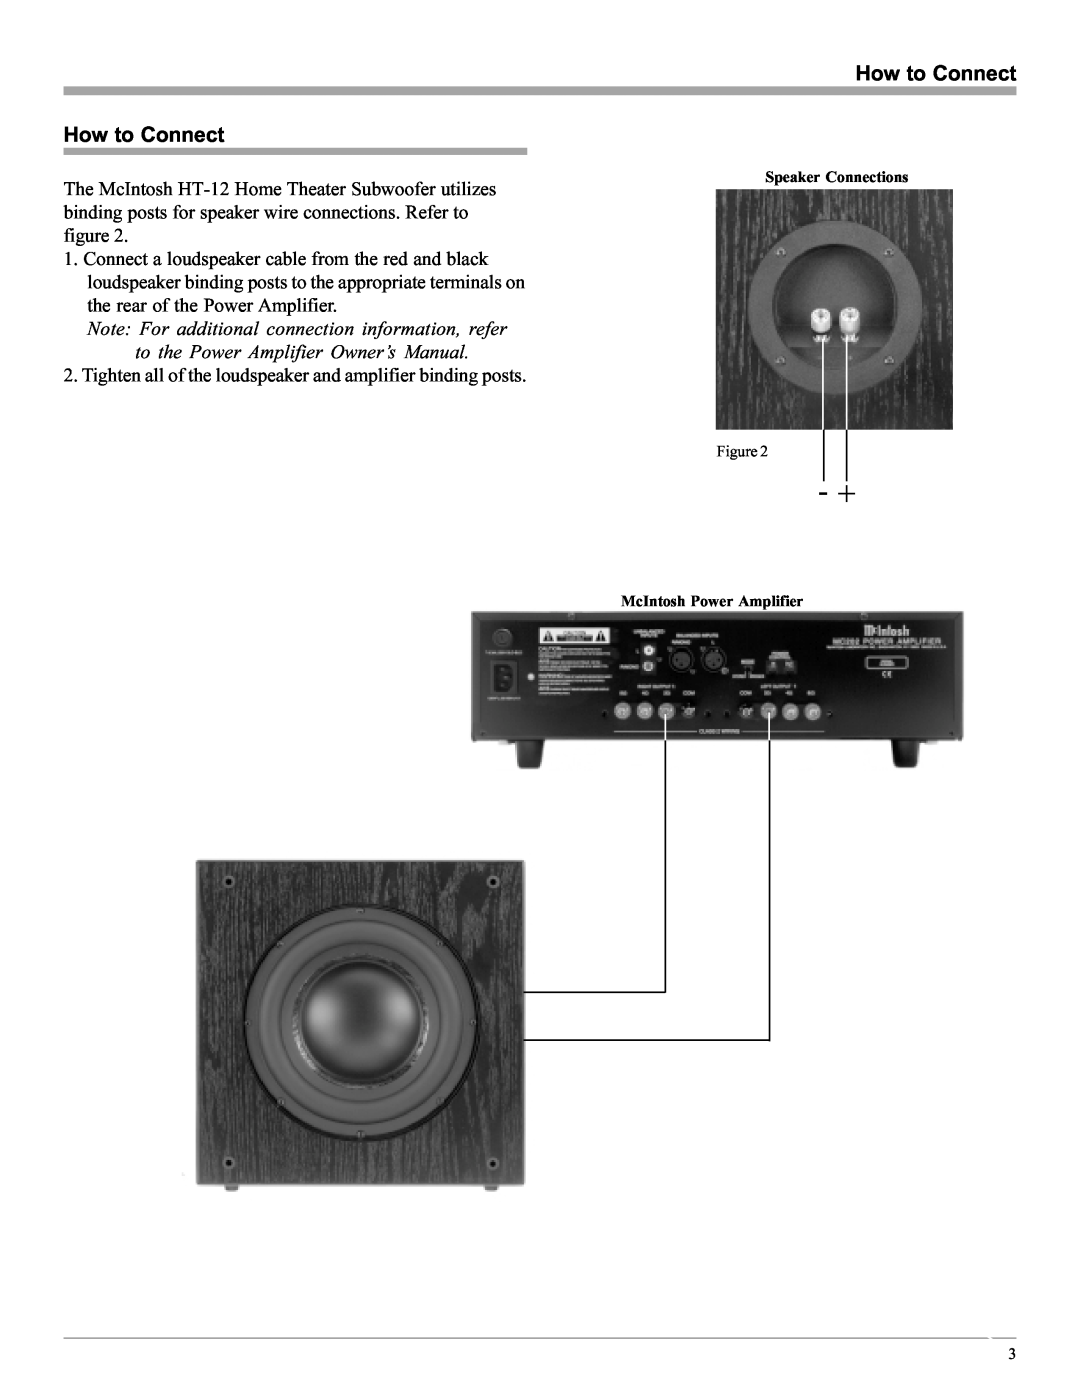 McIntosh HT-12 manual How to Connect 